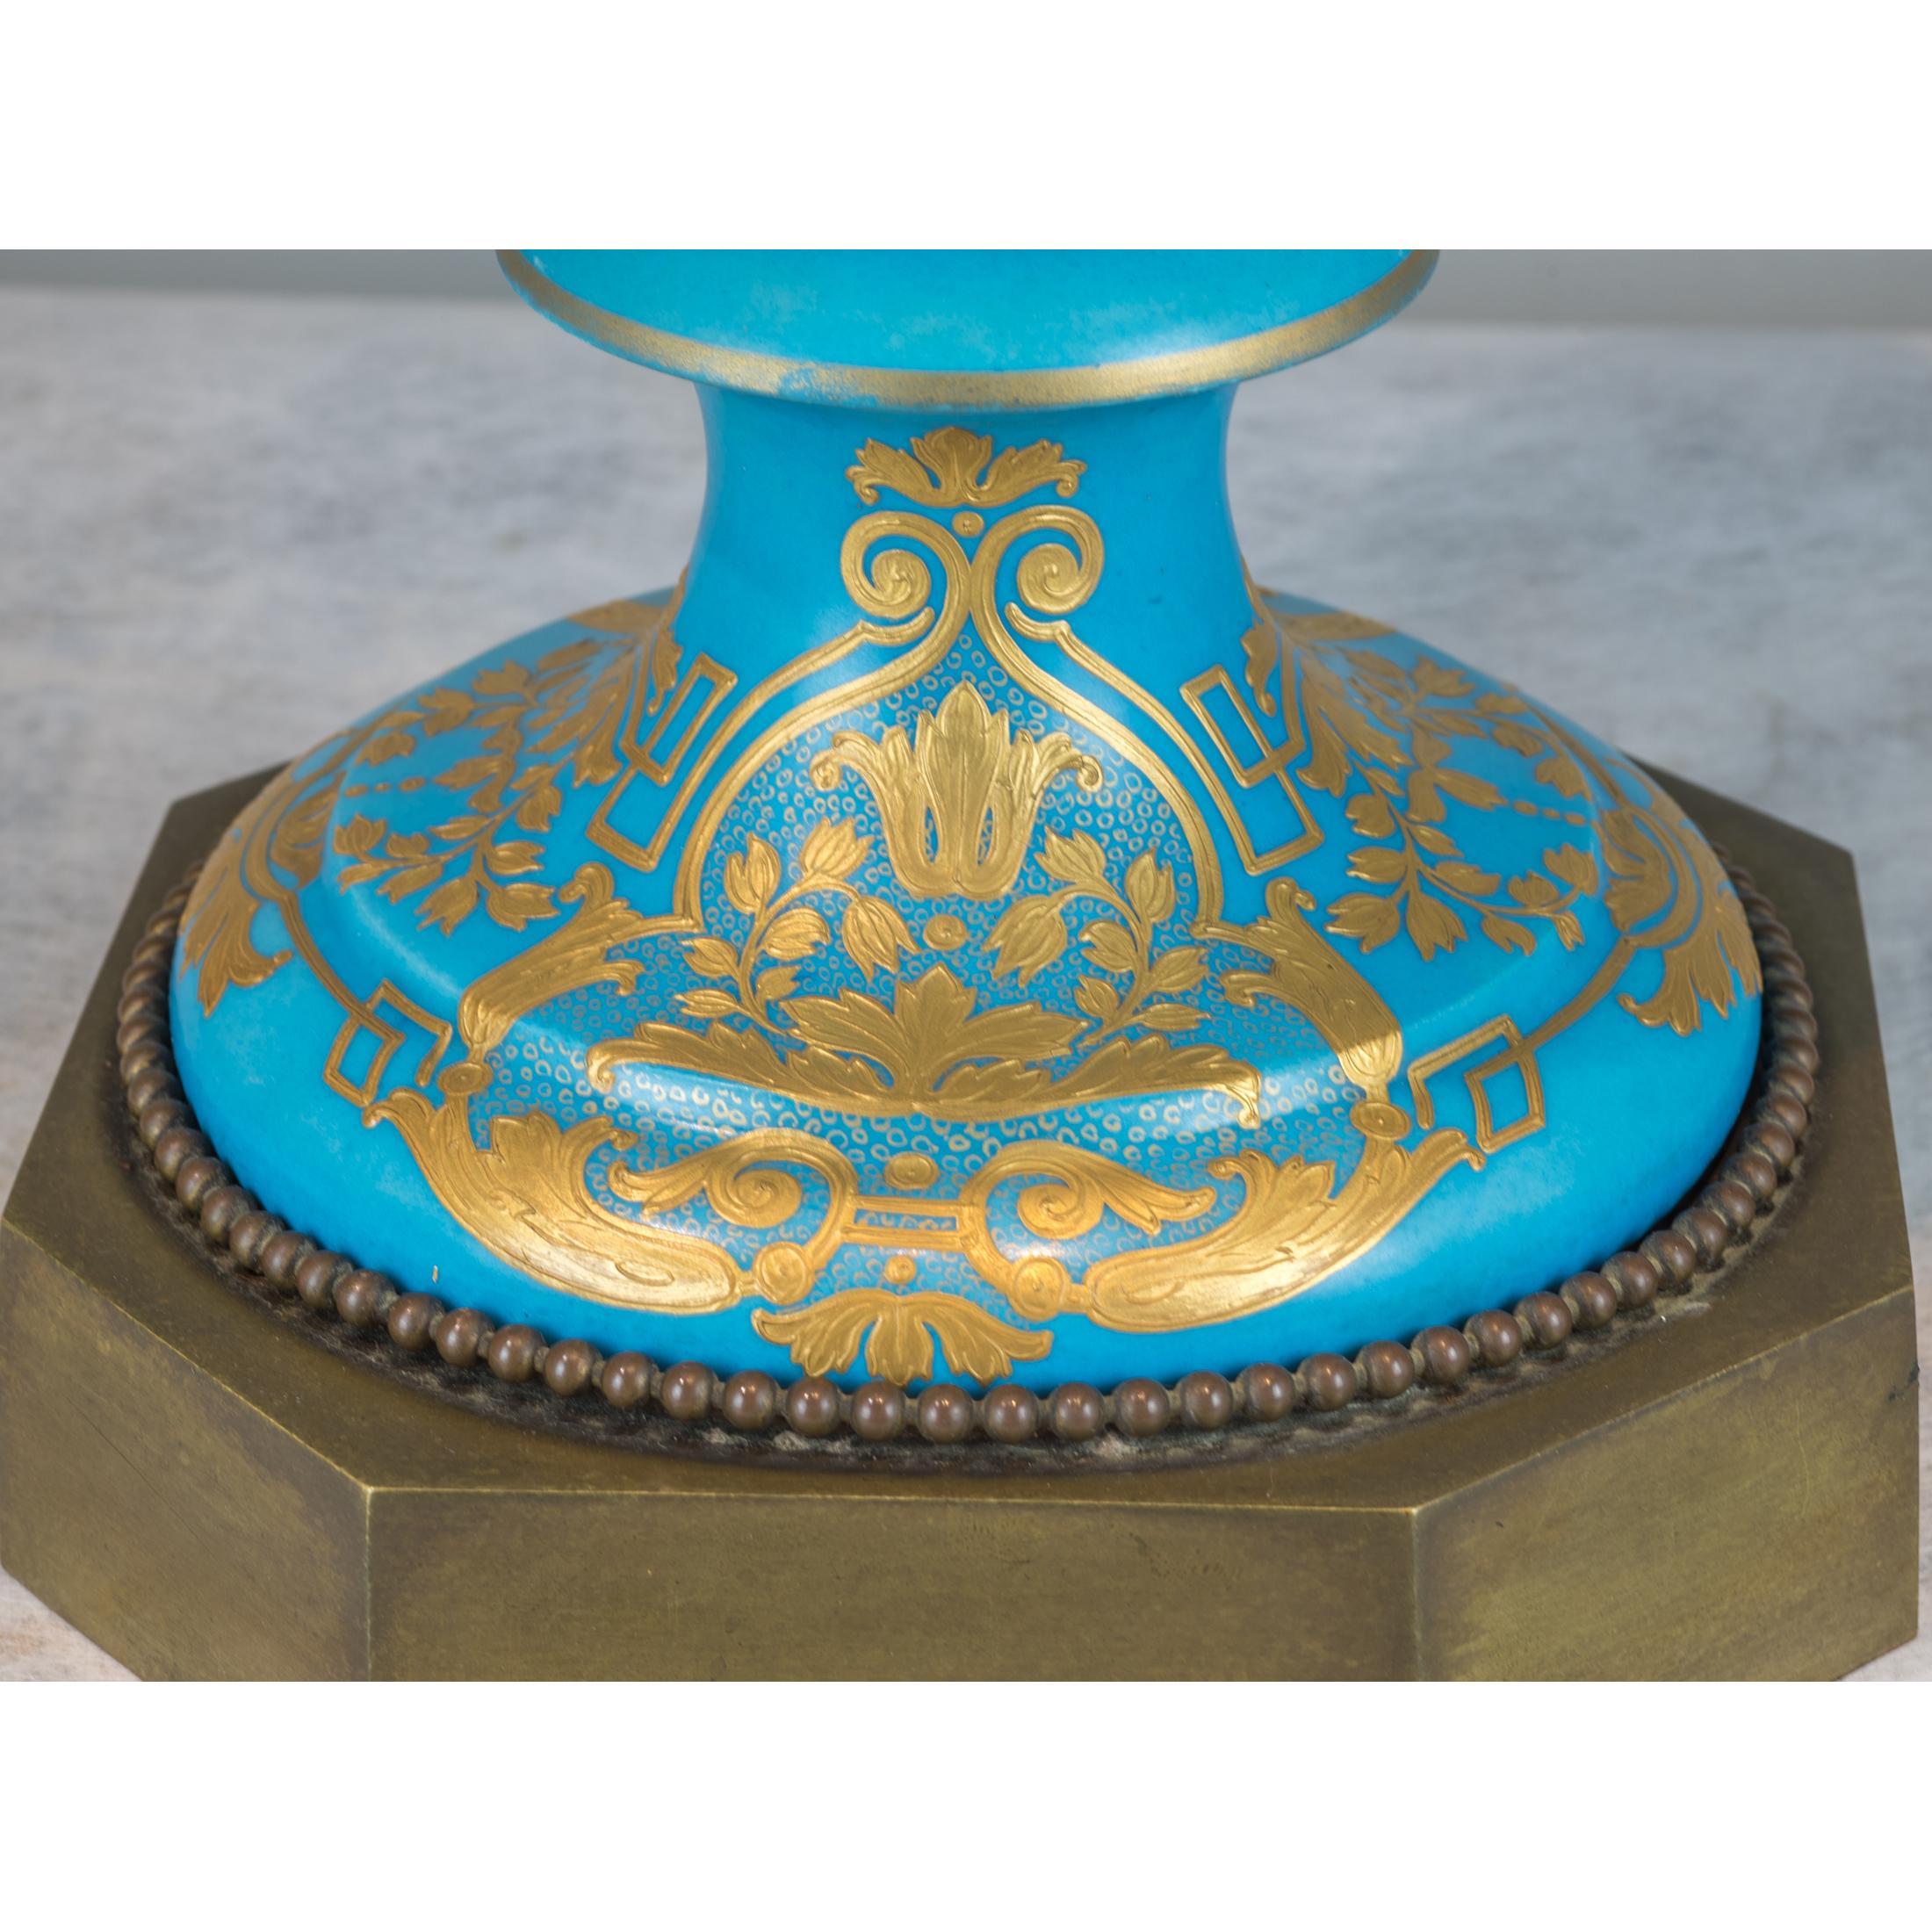 Ormolu-Mounted Sèvres Style Turquoise-Ground Vase and Cover For Sale 1